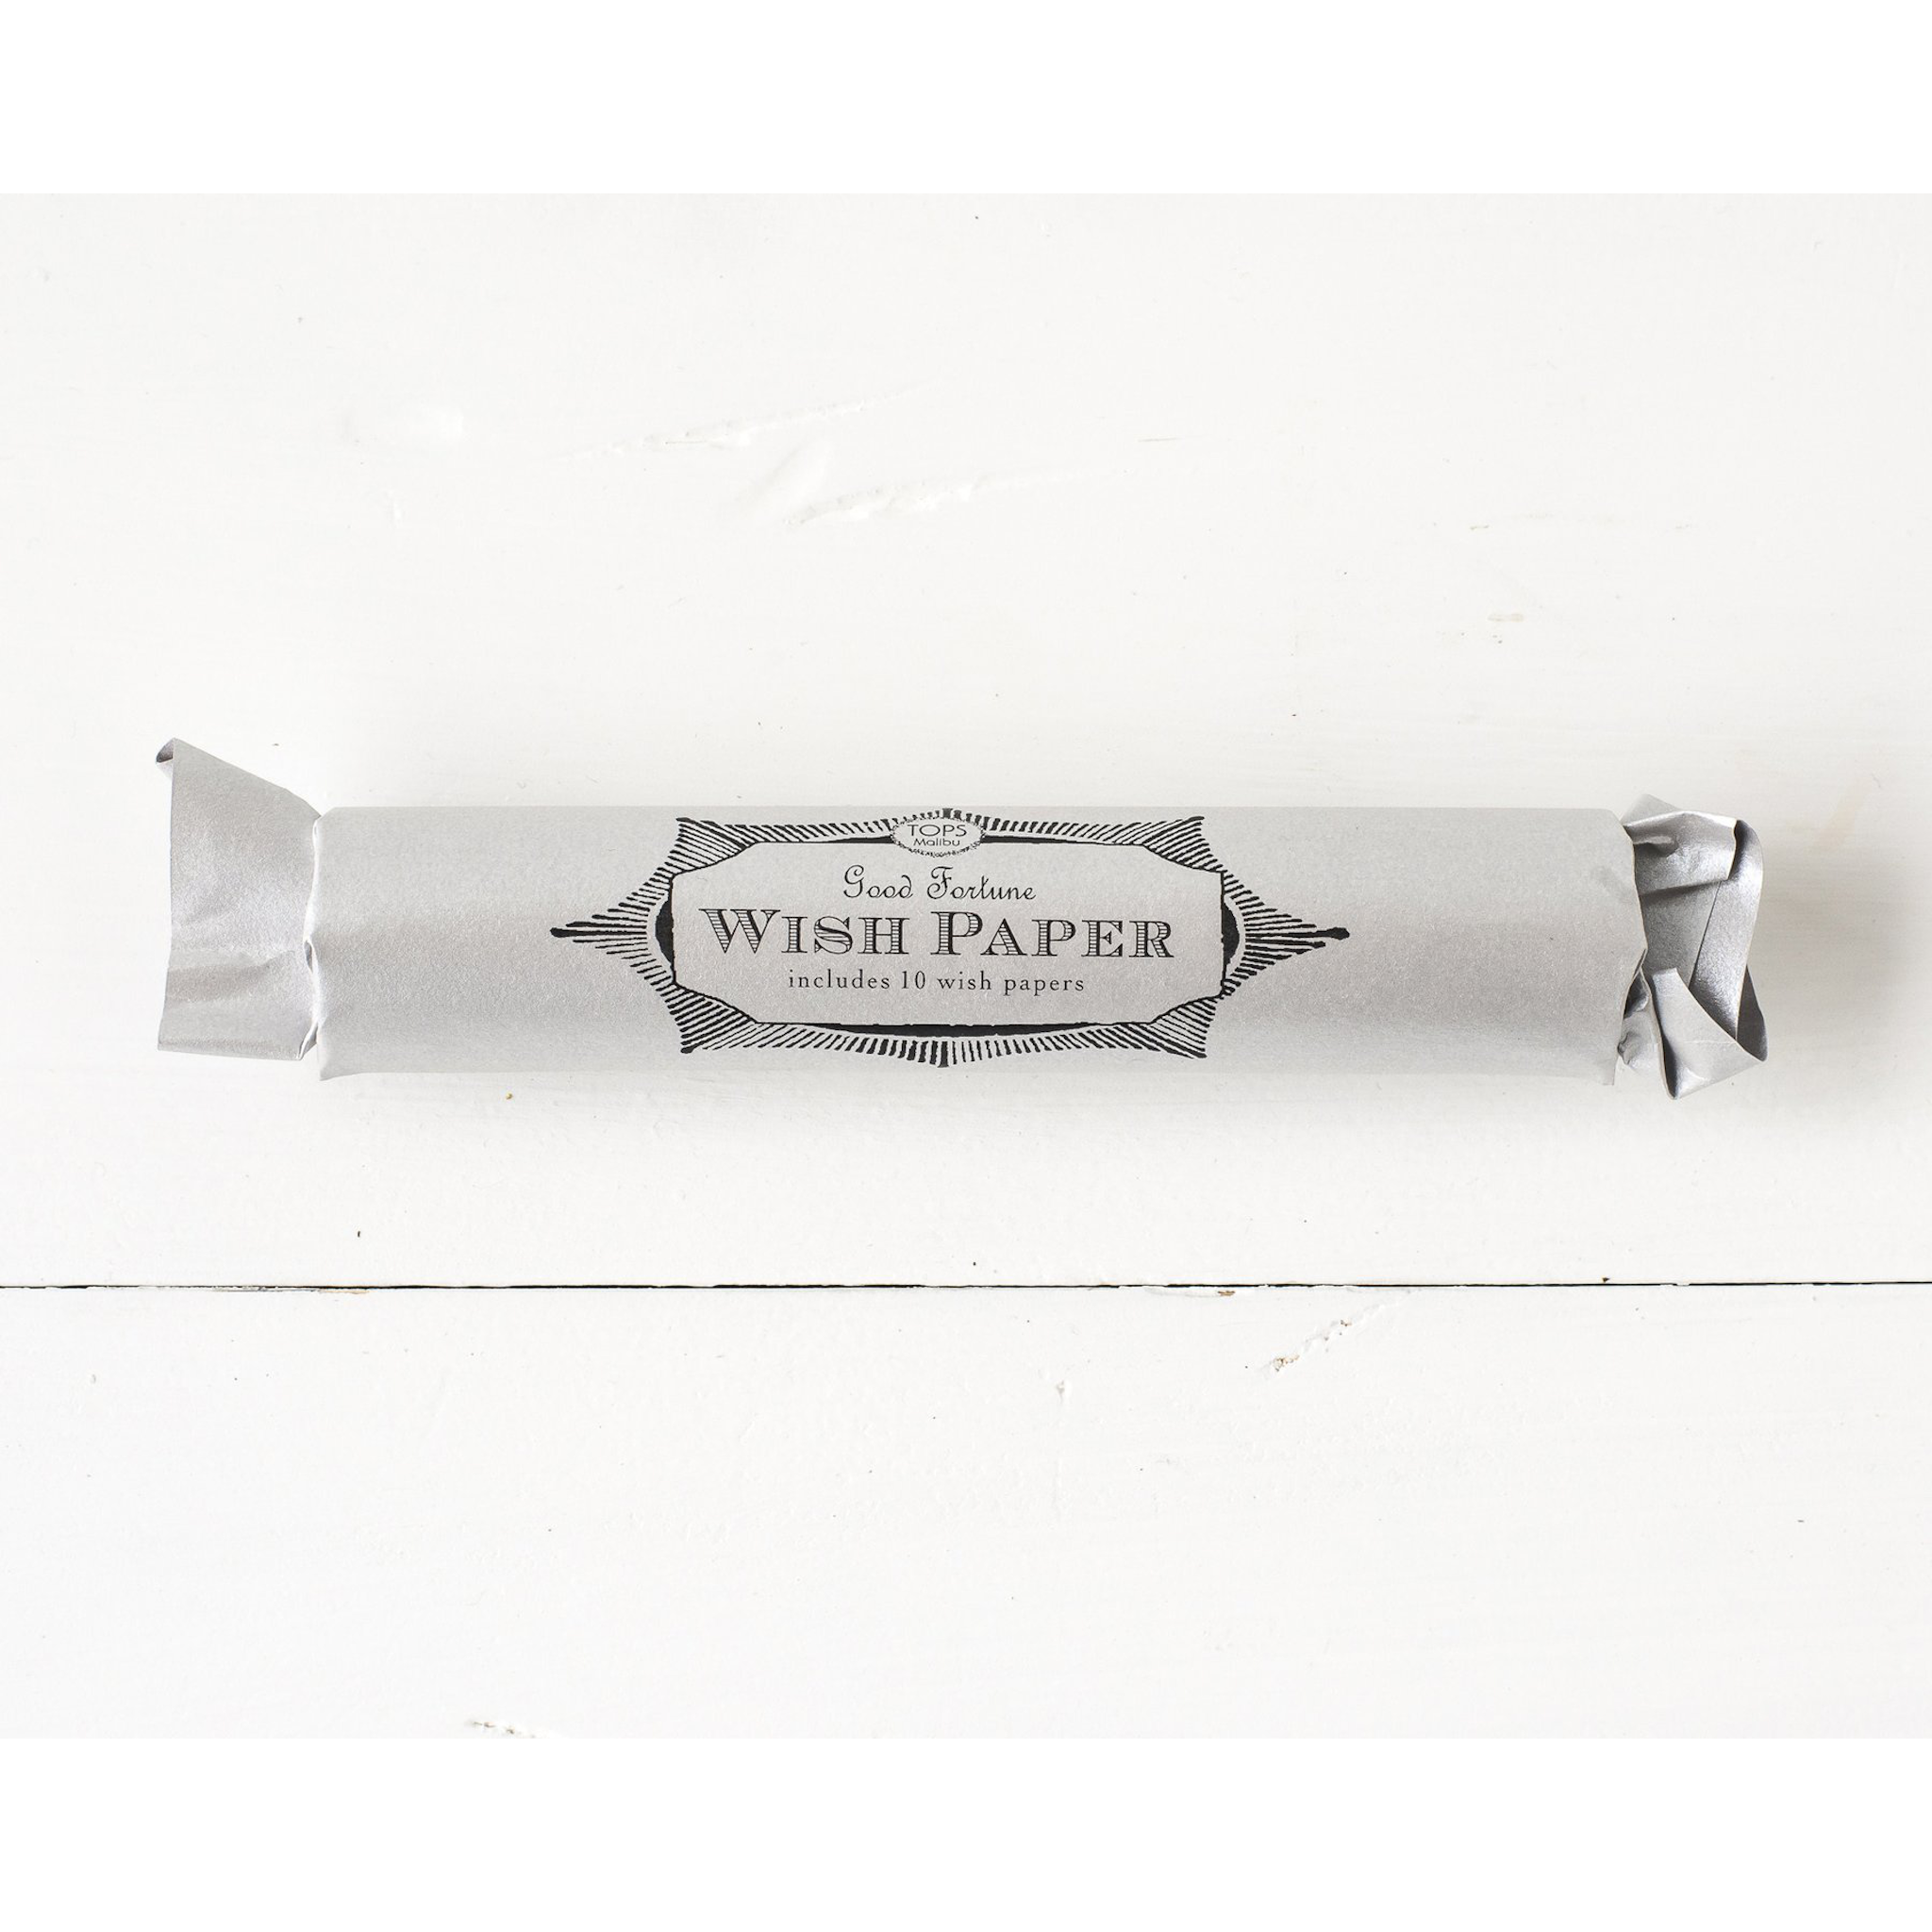 Two rolls of magenta Tops Malibu Wish Papers on a white background.